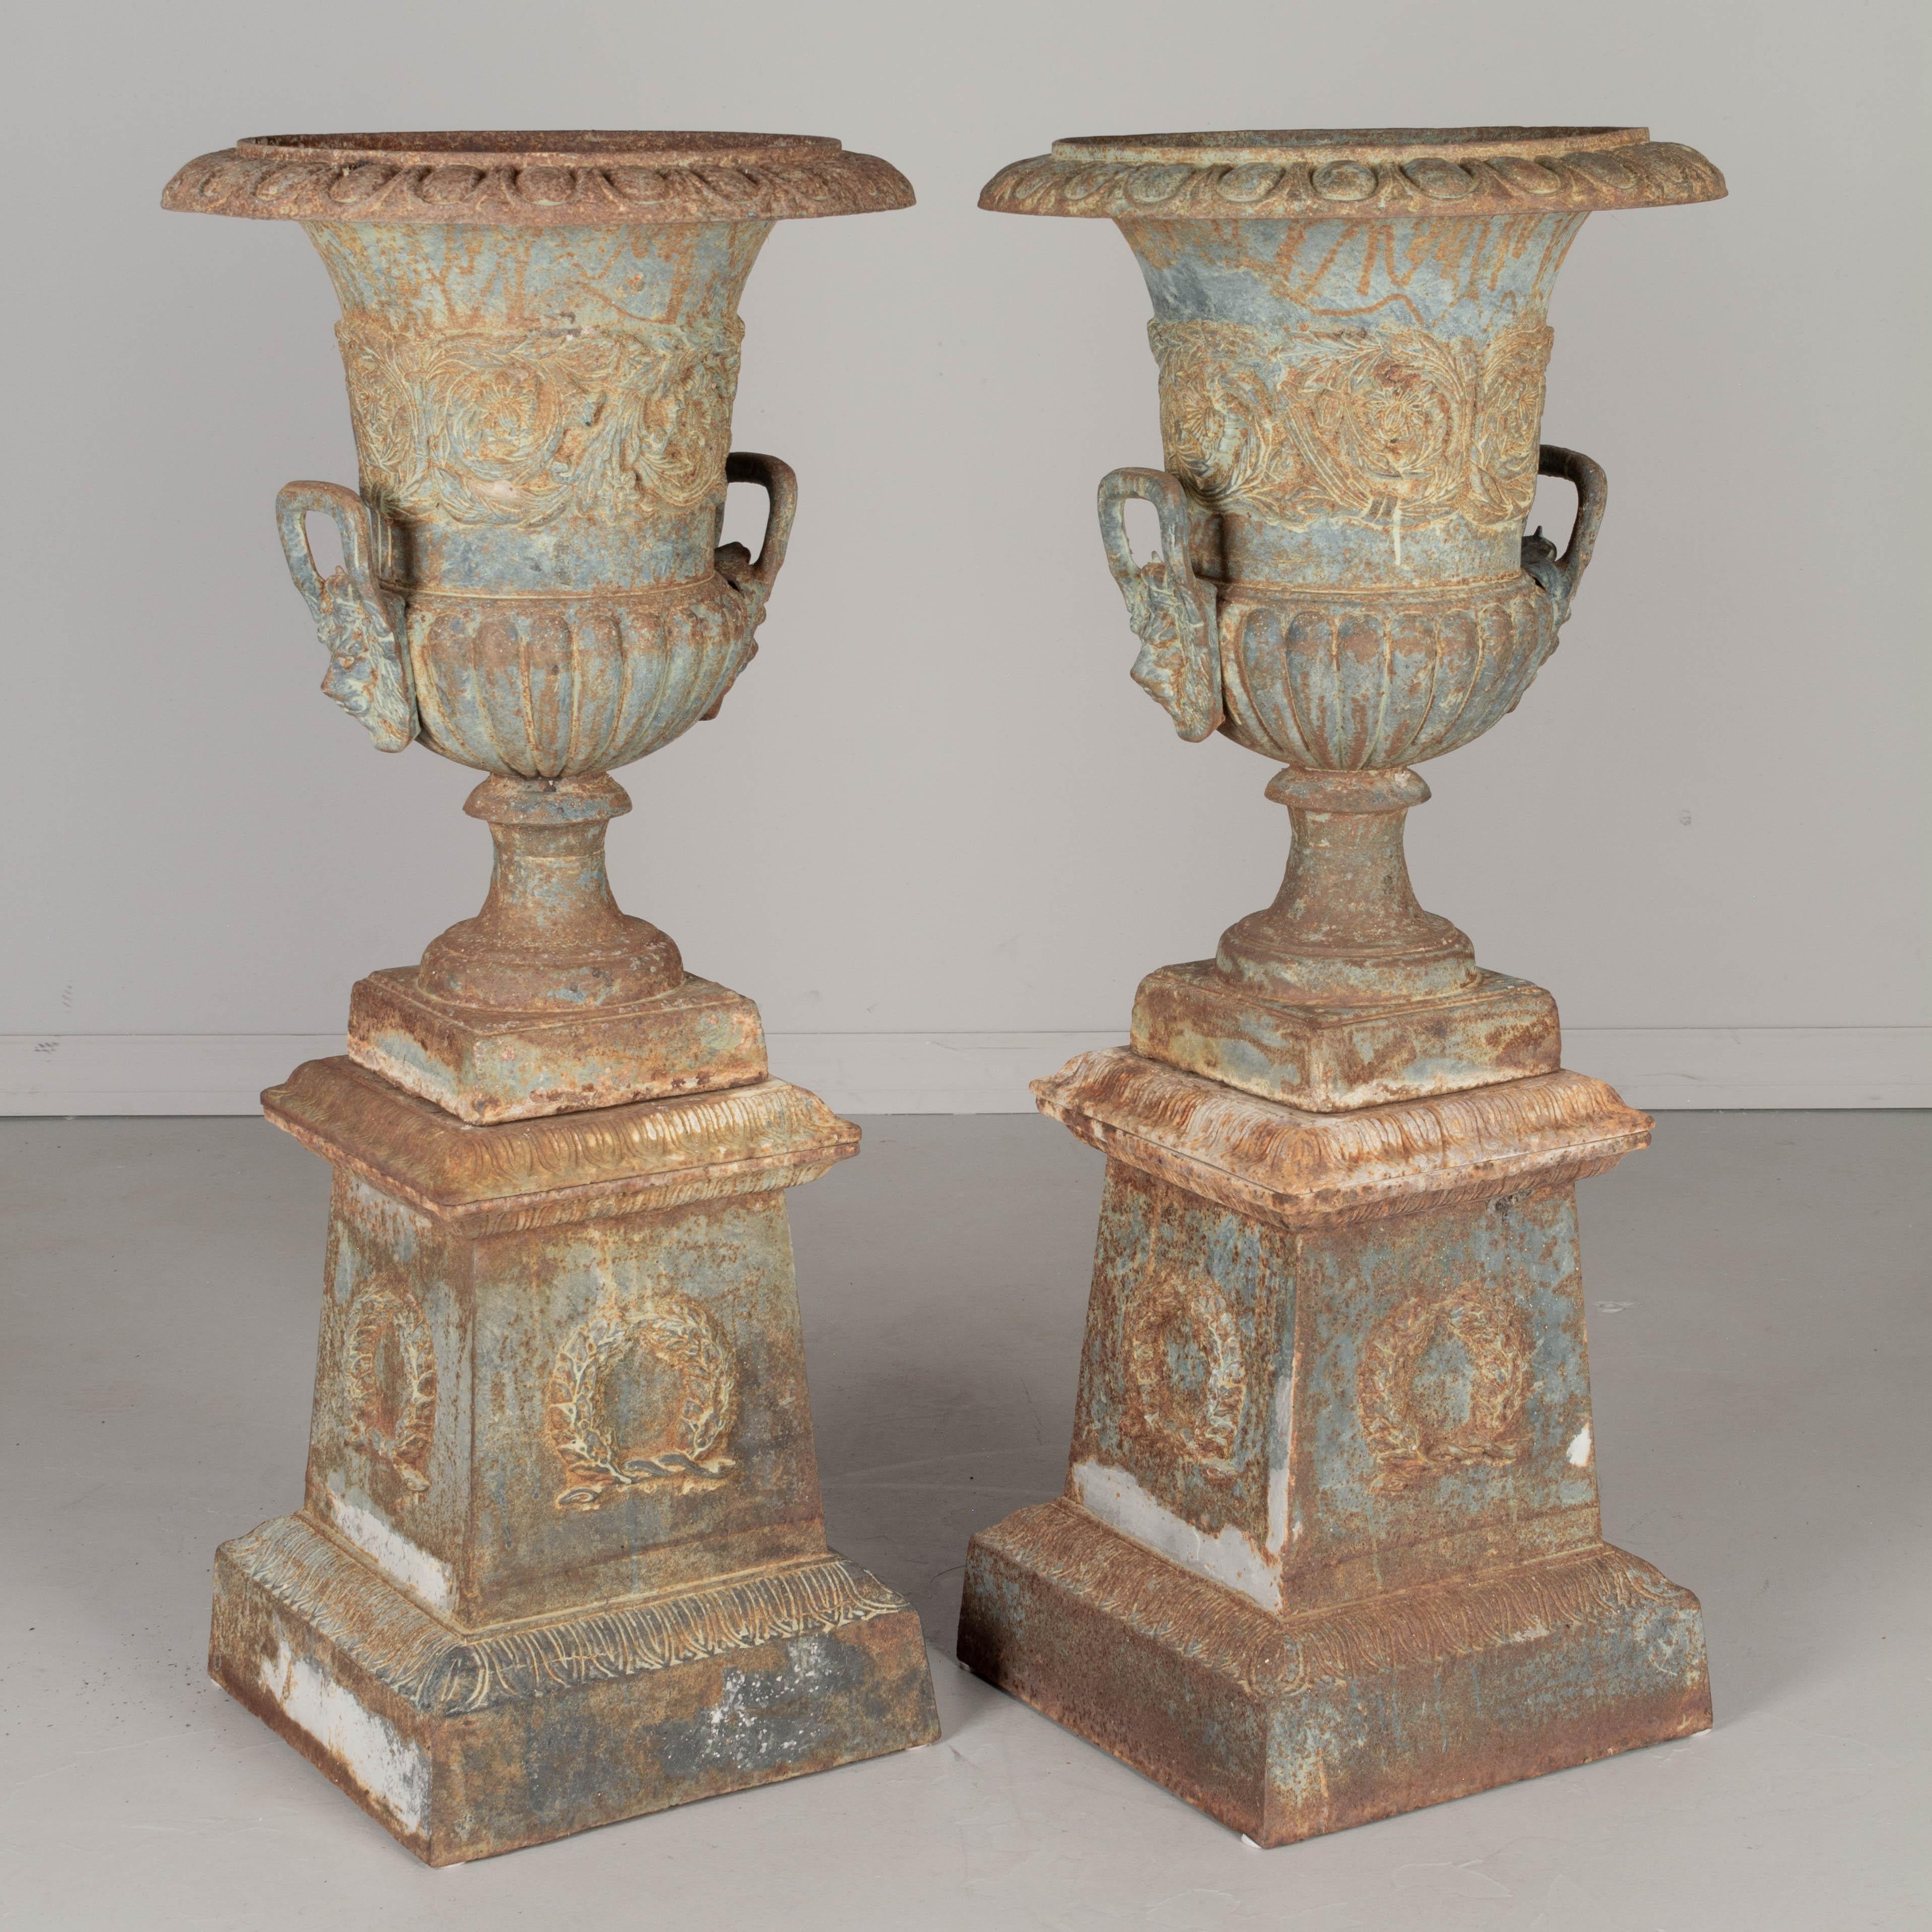 Pair of 19th Century French Cast Iron Garden Urns In Good Condition For Sale In Winter Park, FL